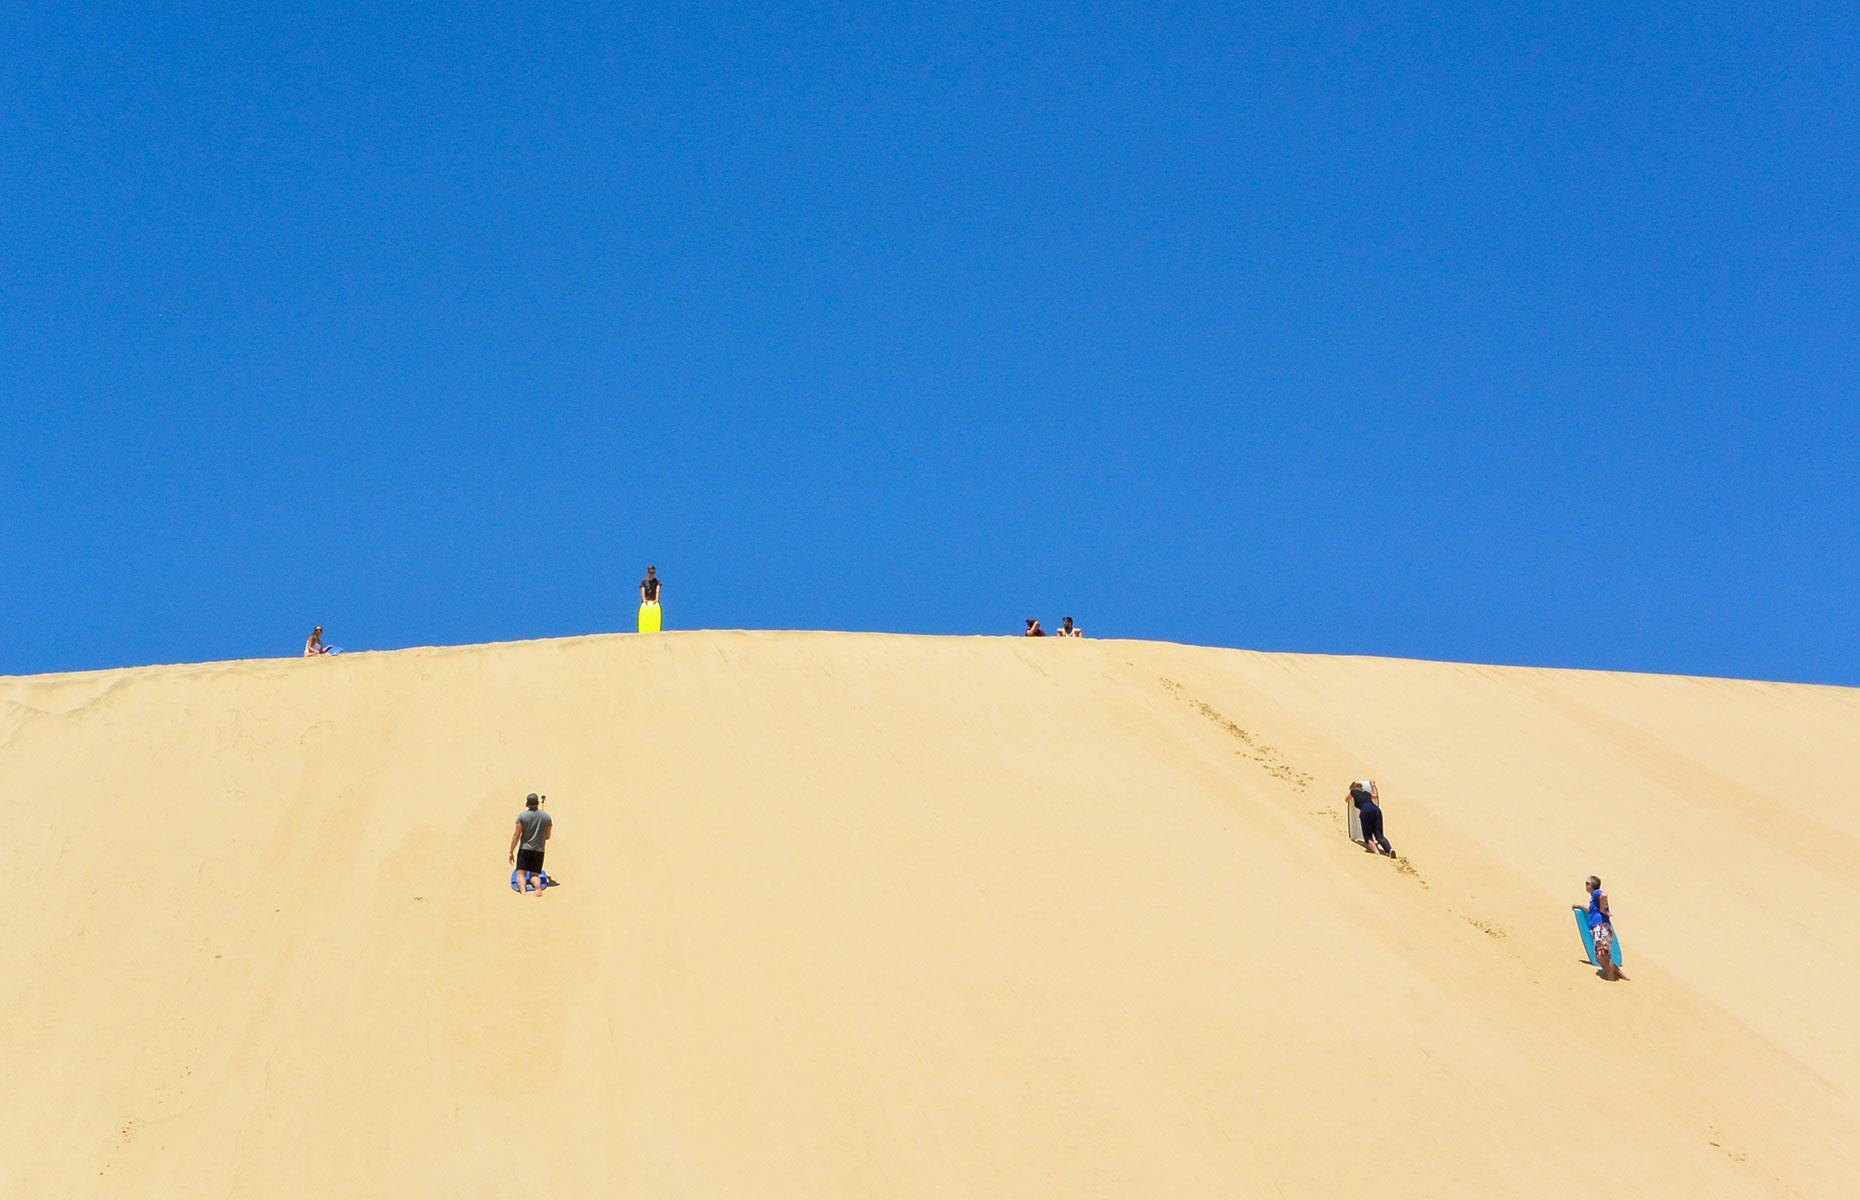 Sandboarding on New Zealand’s Giant Sand Dunes is some of the best fun you’ll have on a trip to New Zealand. Nowhere is better than the towering sand dunes at this recreation area, en route to Cape Reinga in the far north of the North Island. Boards can be hired in the car park and you walk them up to the top of the slope before speeding down on your belly.